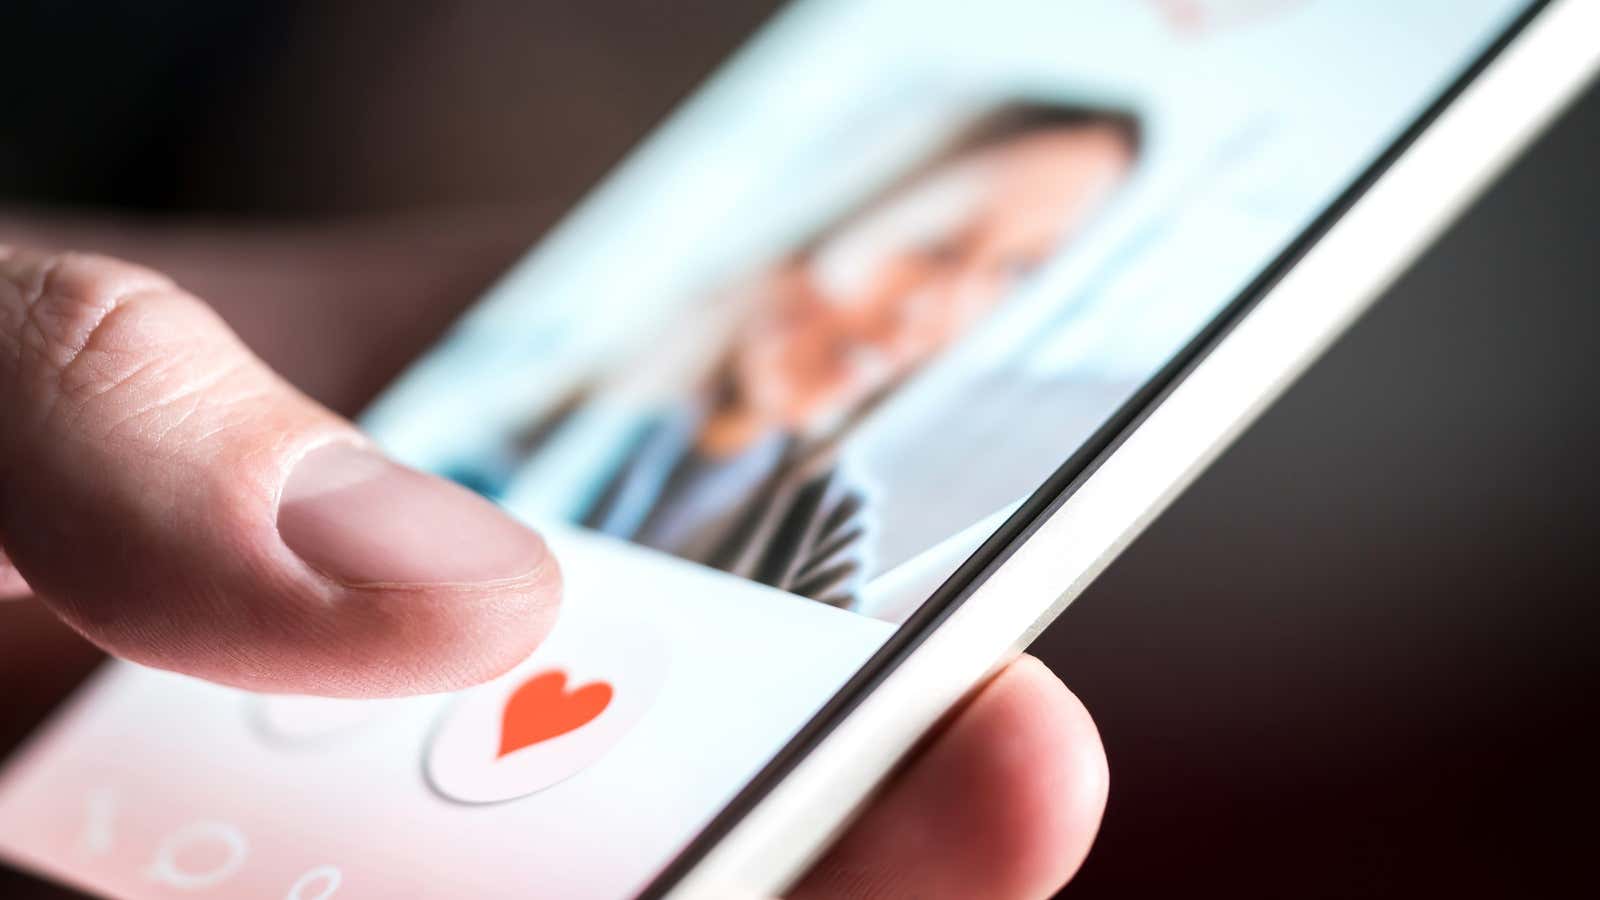 Online dating has a racial  and cultural bias problem, which can highly be attested to the portrayals of people of color in media.